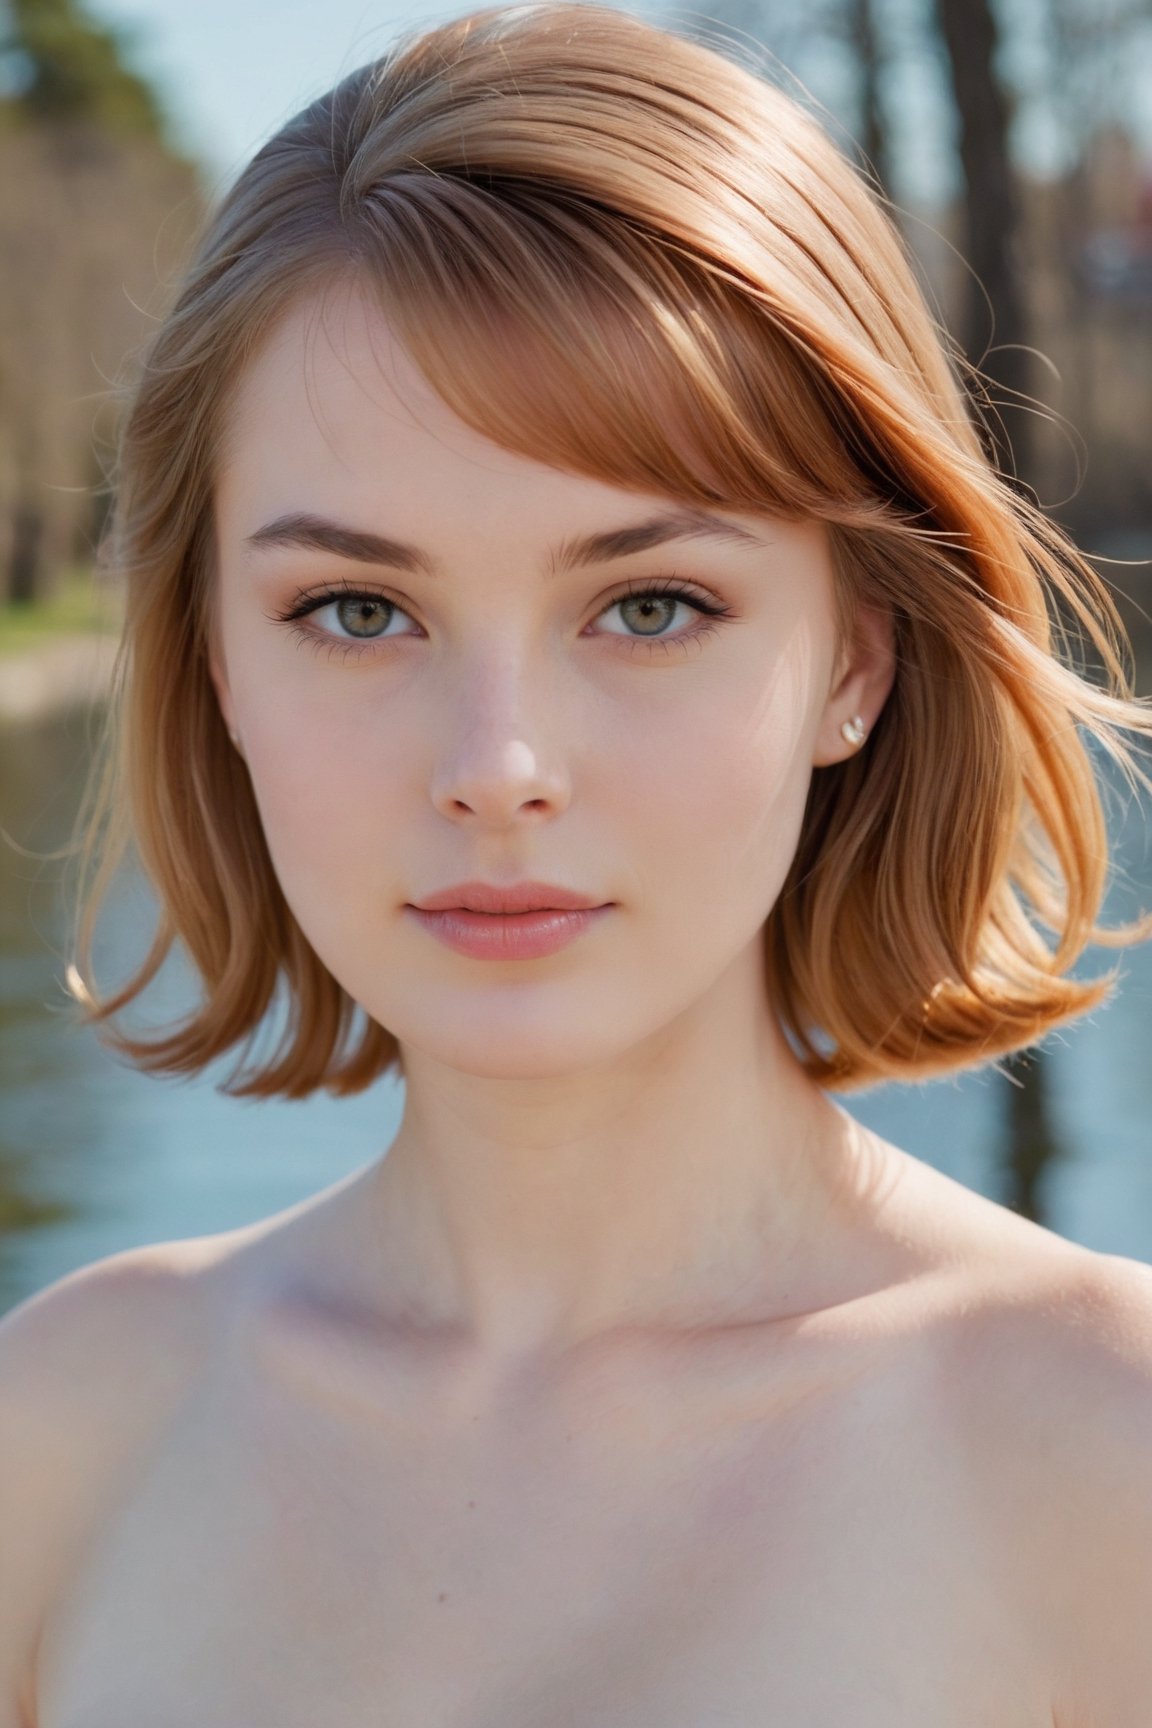 headshot,Nudity,Naked,Nude,No Clothes,Caramel hair,face similar to Grace Kelly,Russian,pale skin,Bangs Hairstyle,No-makeup makeup,21 year old,Boyish_normal_breasts,headshot,Sunny Day Spring,Posing for a photo


